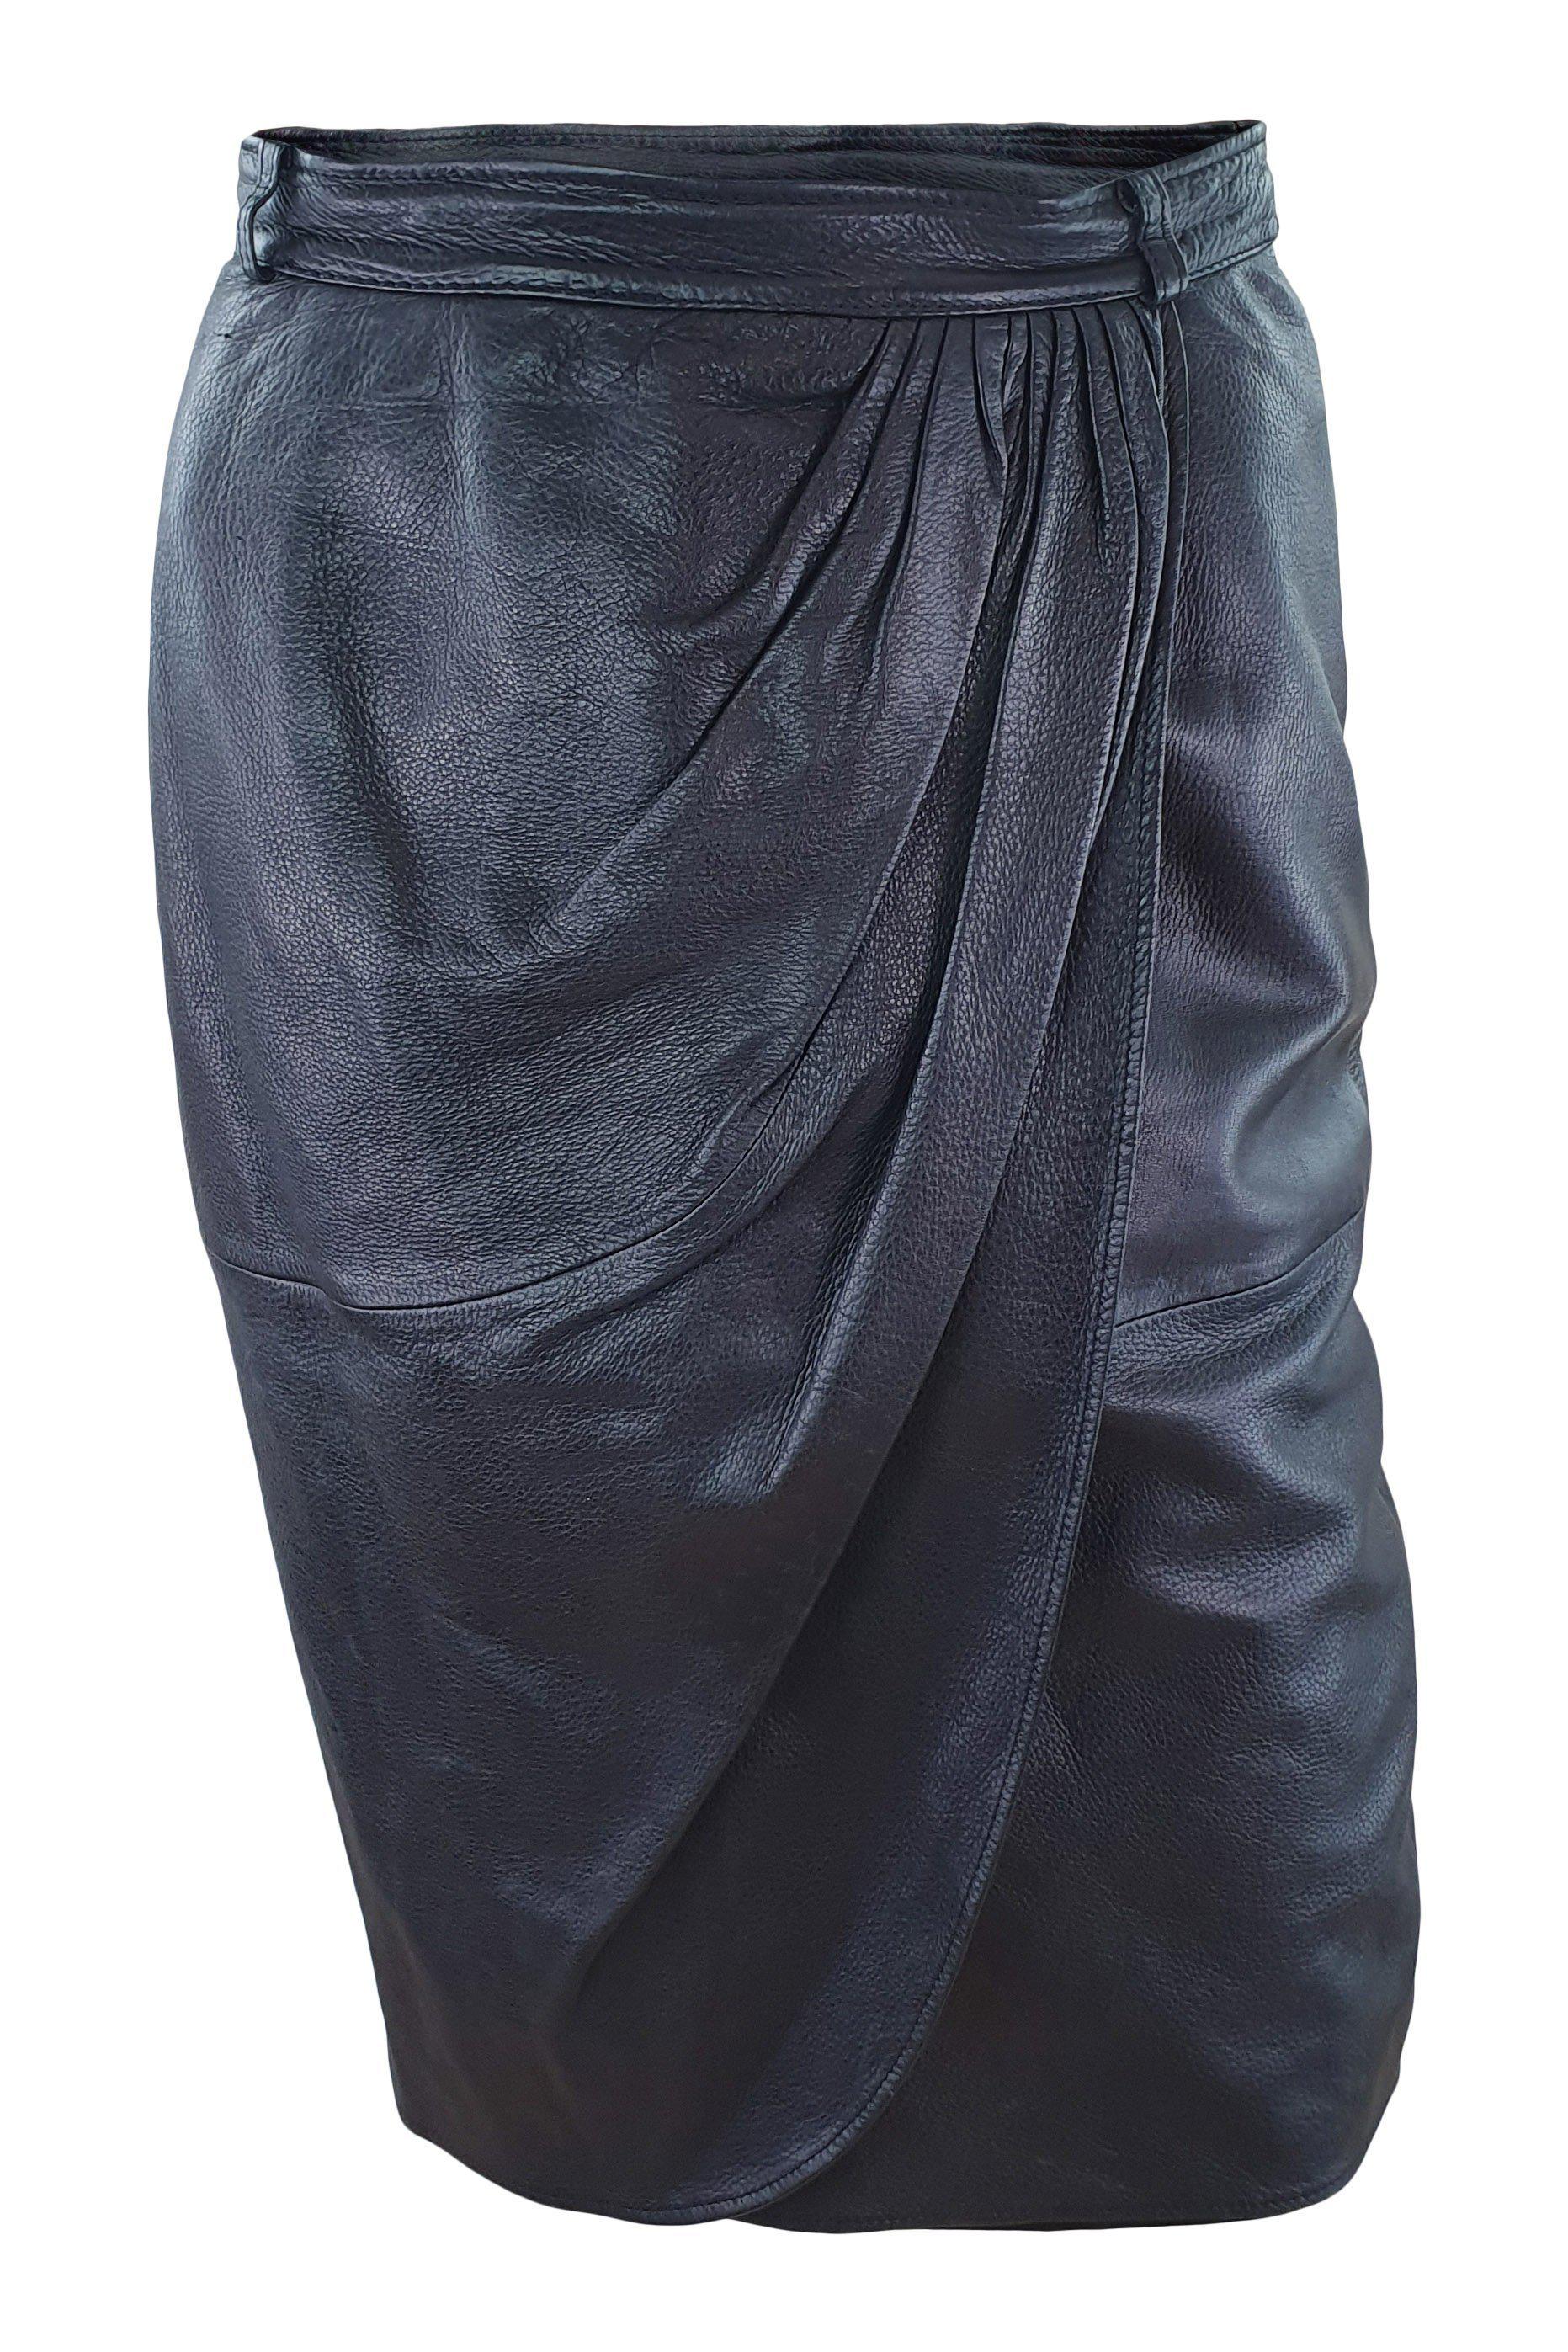 VALENTINO Black Leather Faux Wrap Front Knee Length Skirt (40)-Valentino-The Freperie